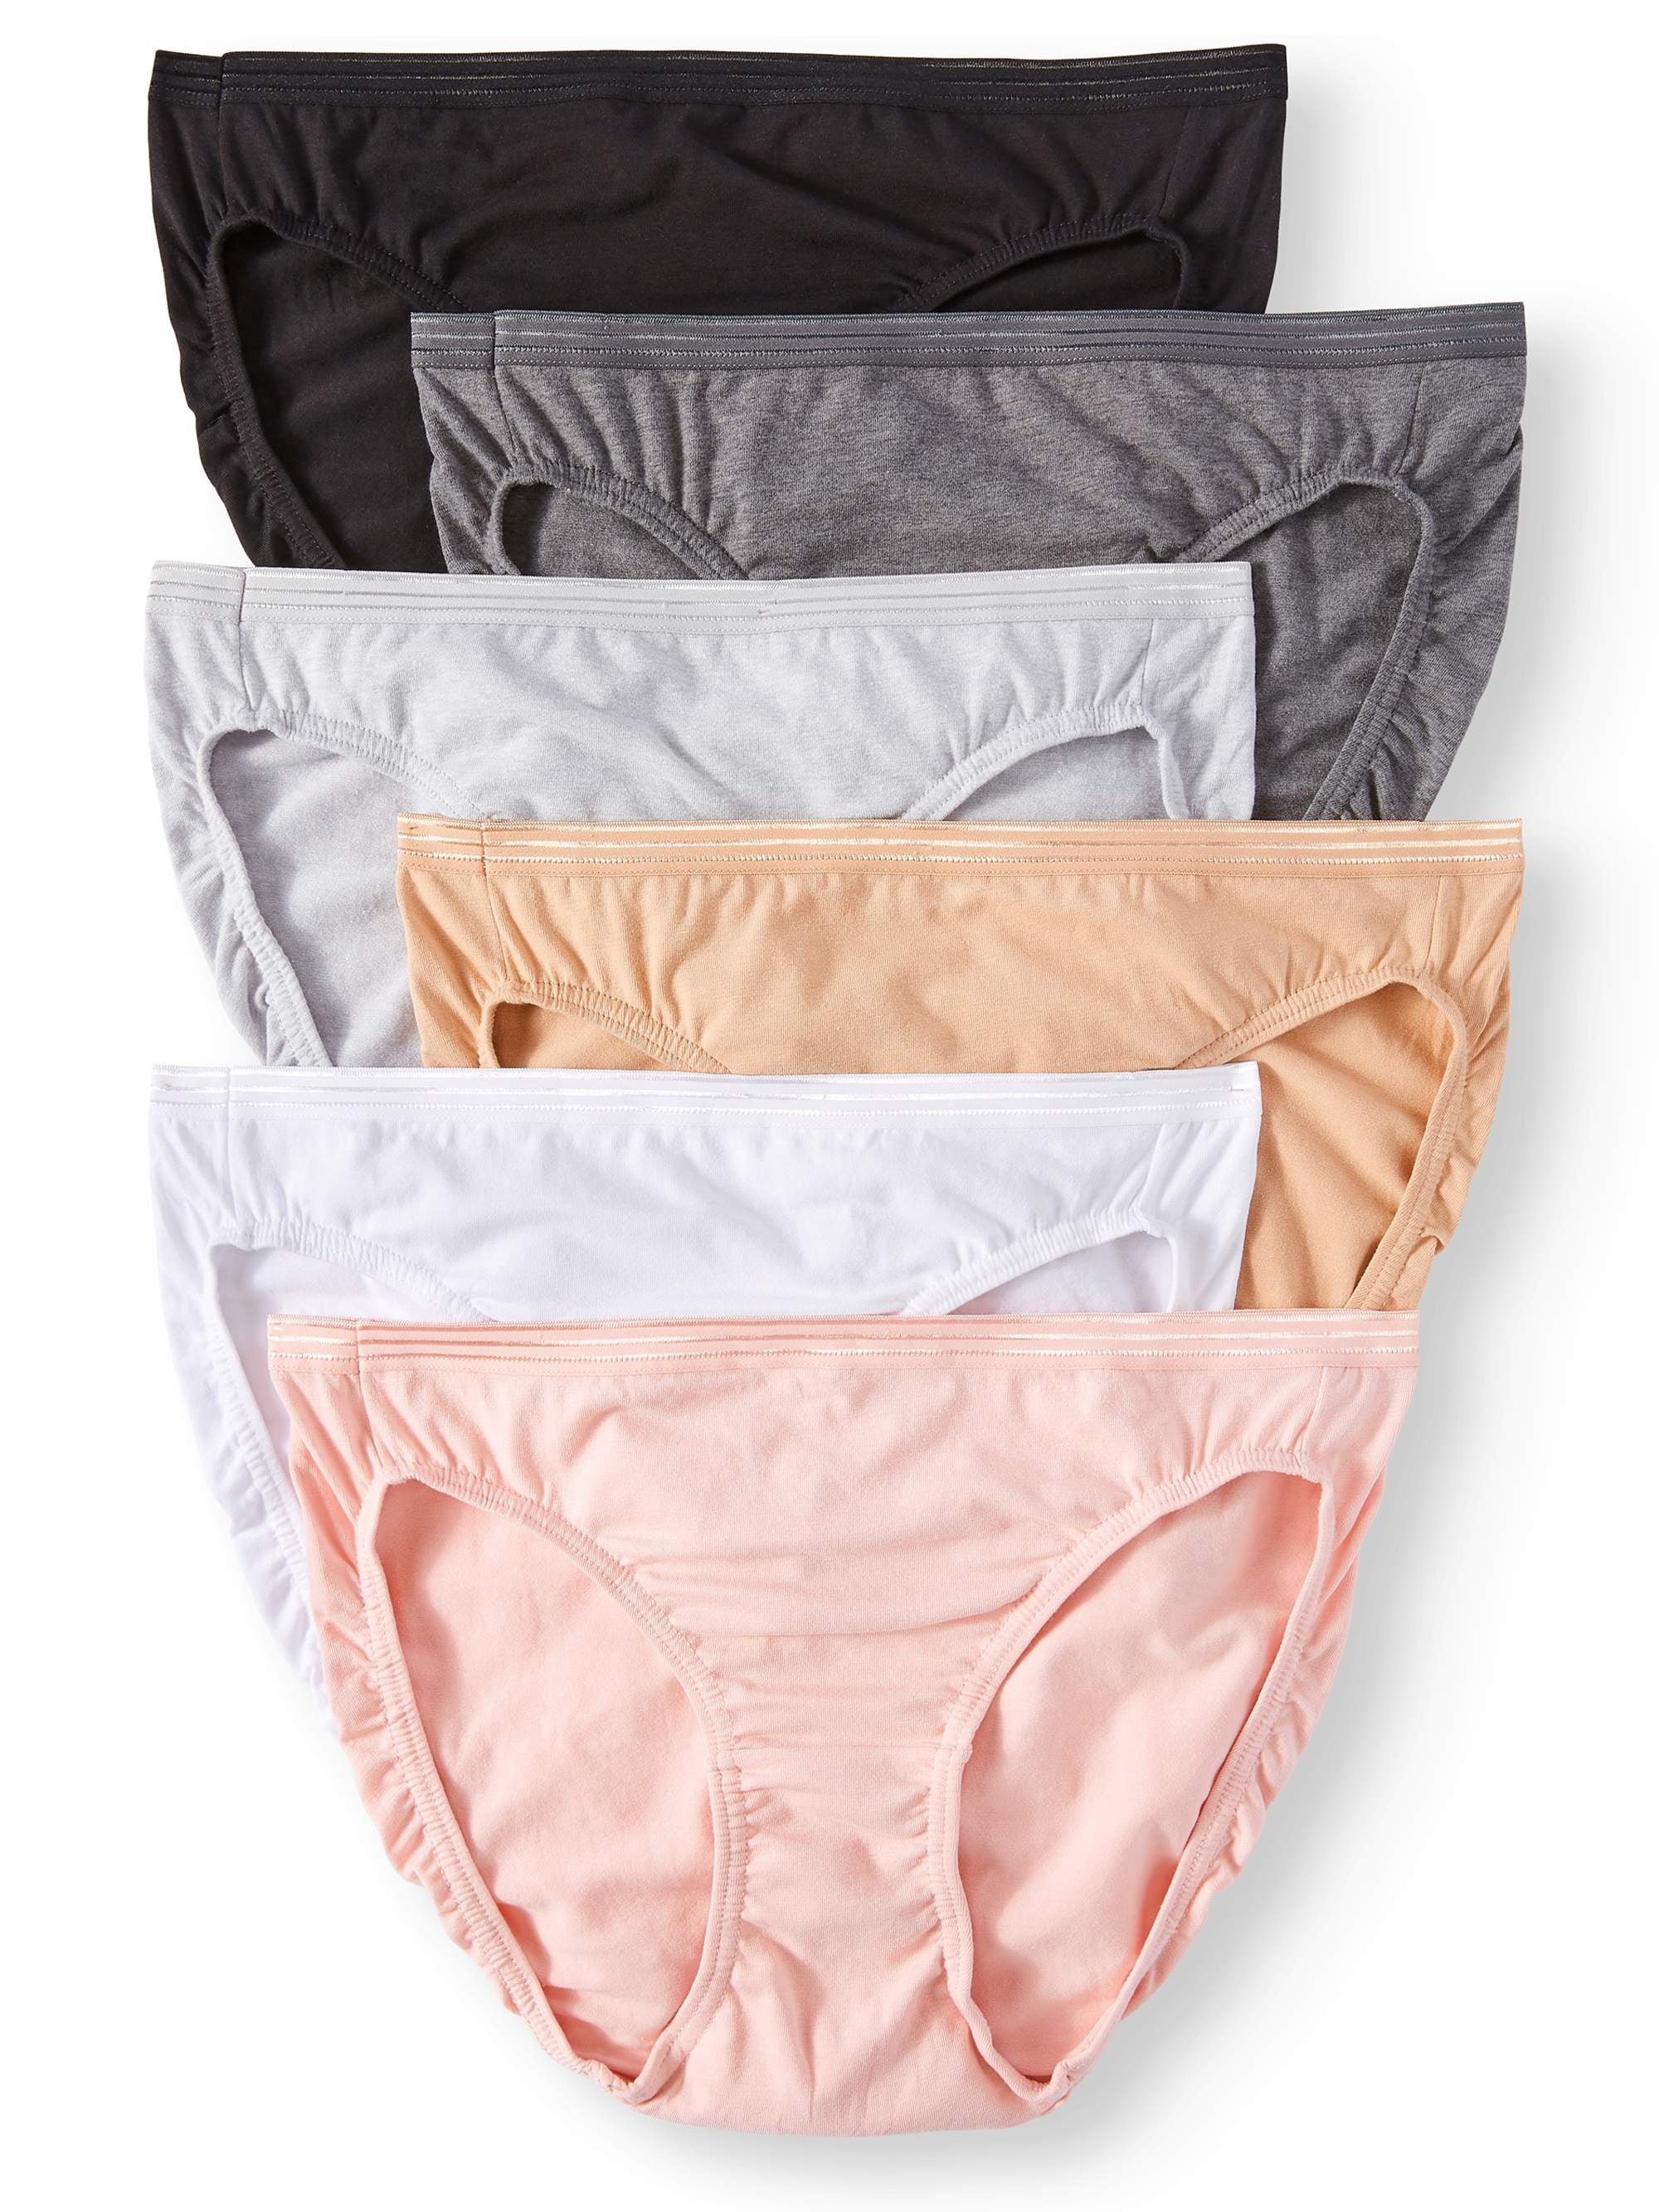 ANZERMIX Women's Breathable Cotton Bikini Panties Pack of 6 (6-Pack Dark  Vintage, Small) at  Women's Clothing store